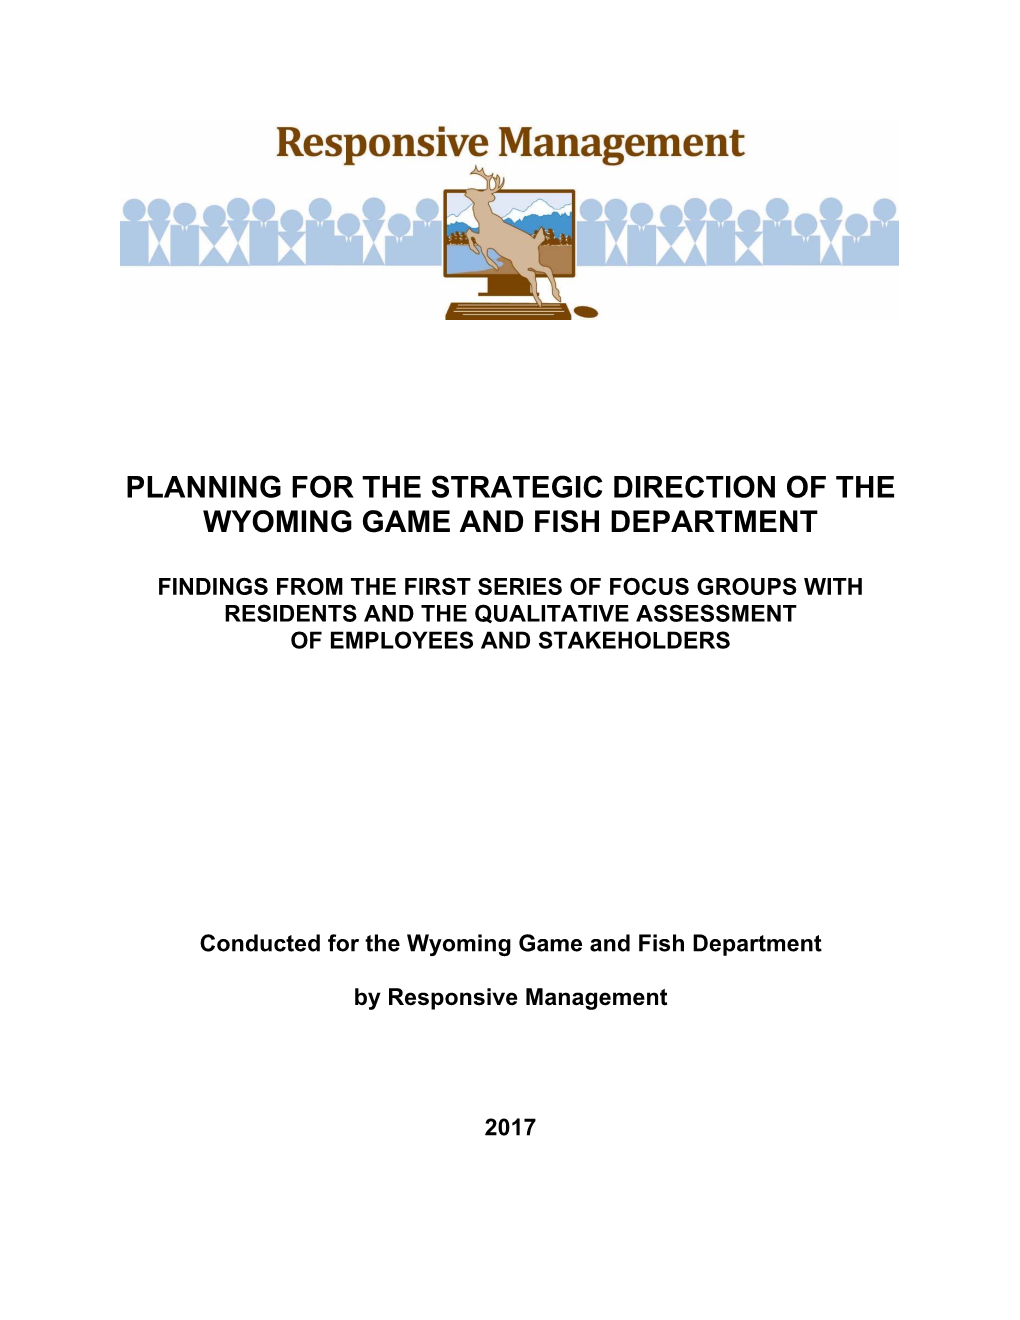 Planning for the Strategic Direction of the Wyoming Game and Fish Department